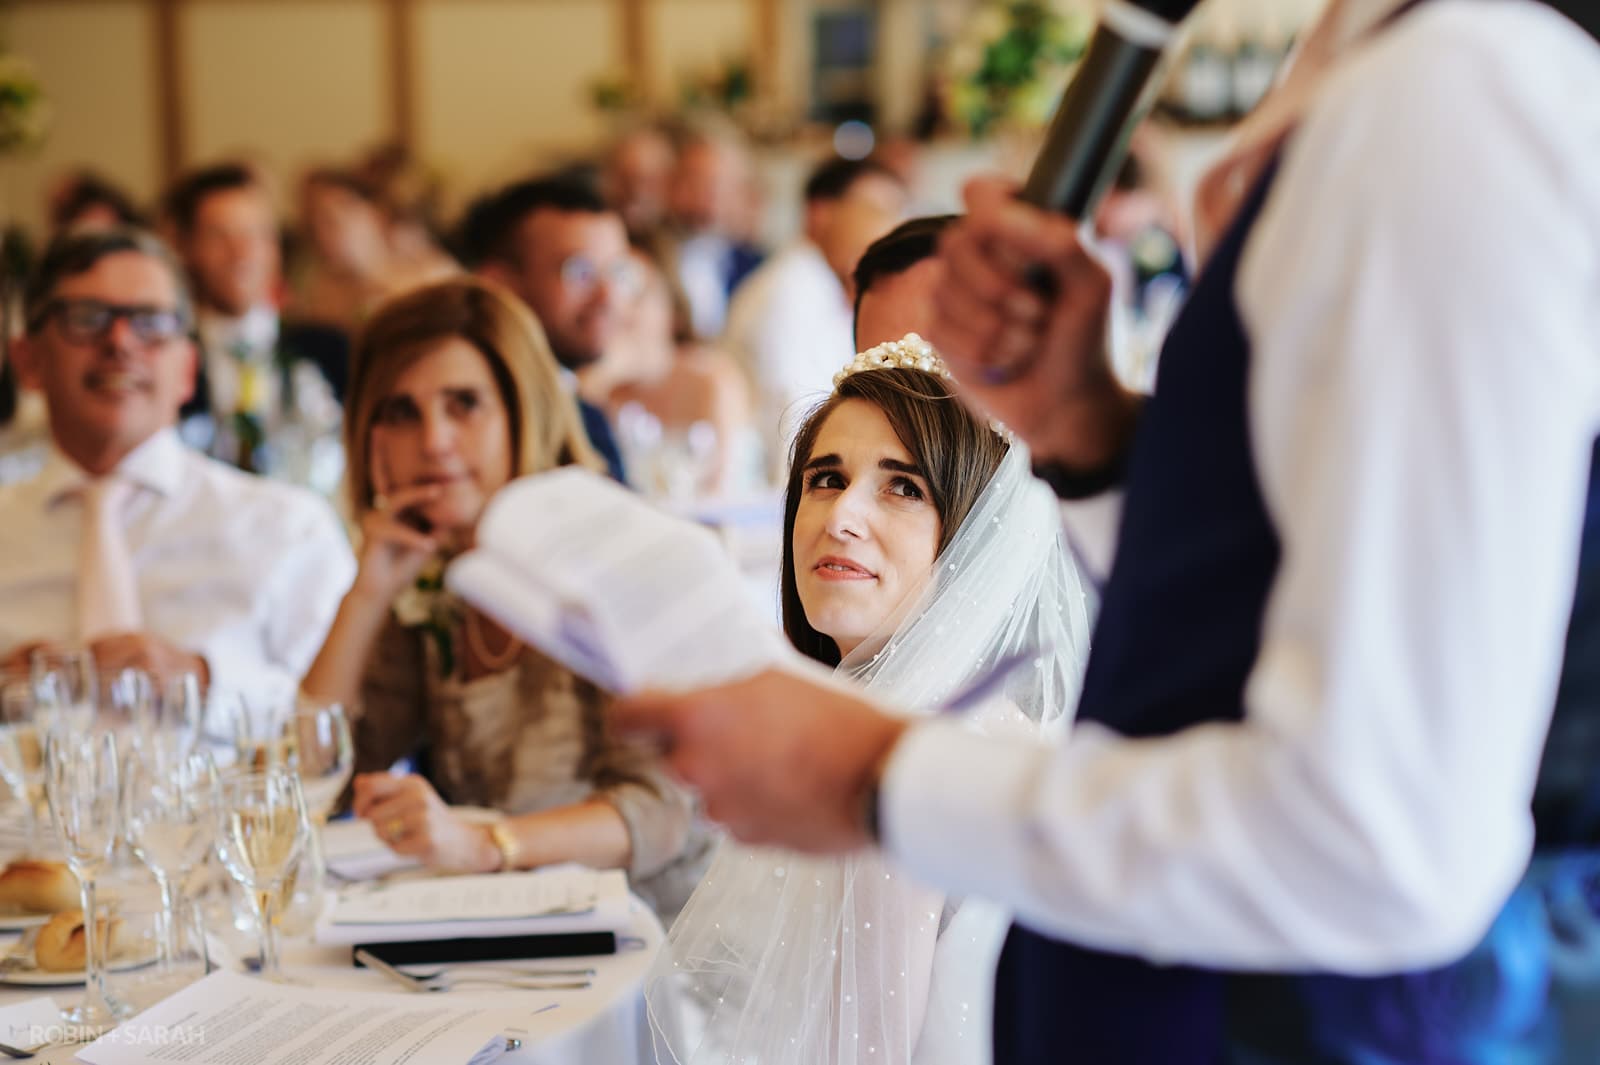 Bride listens to groom give speech during wedding meal